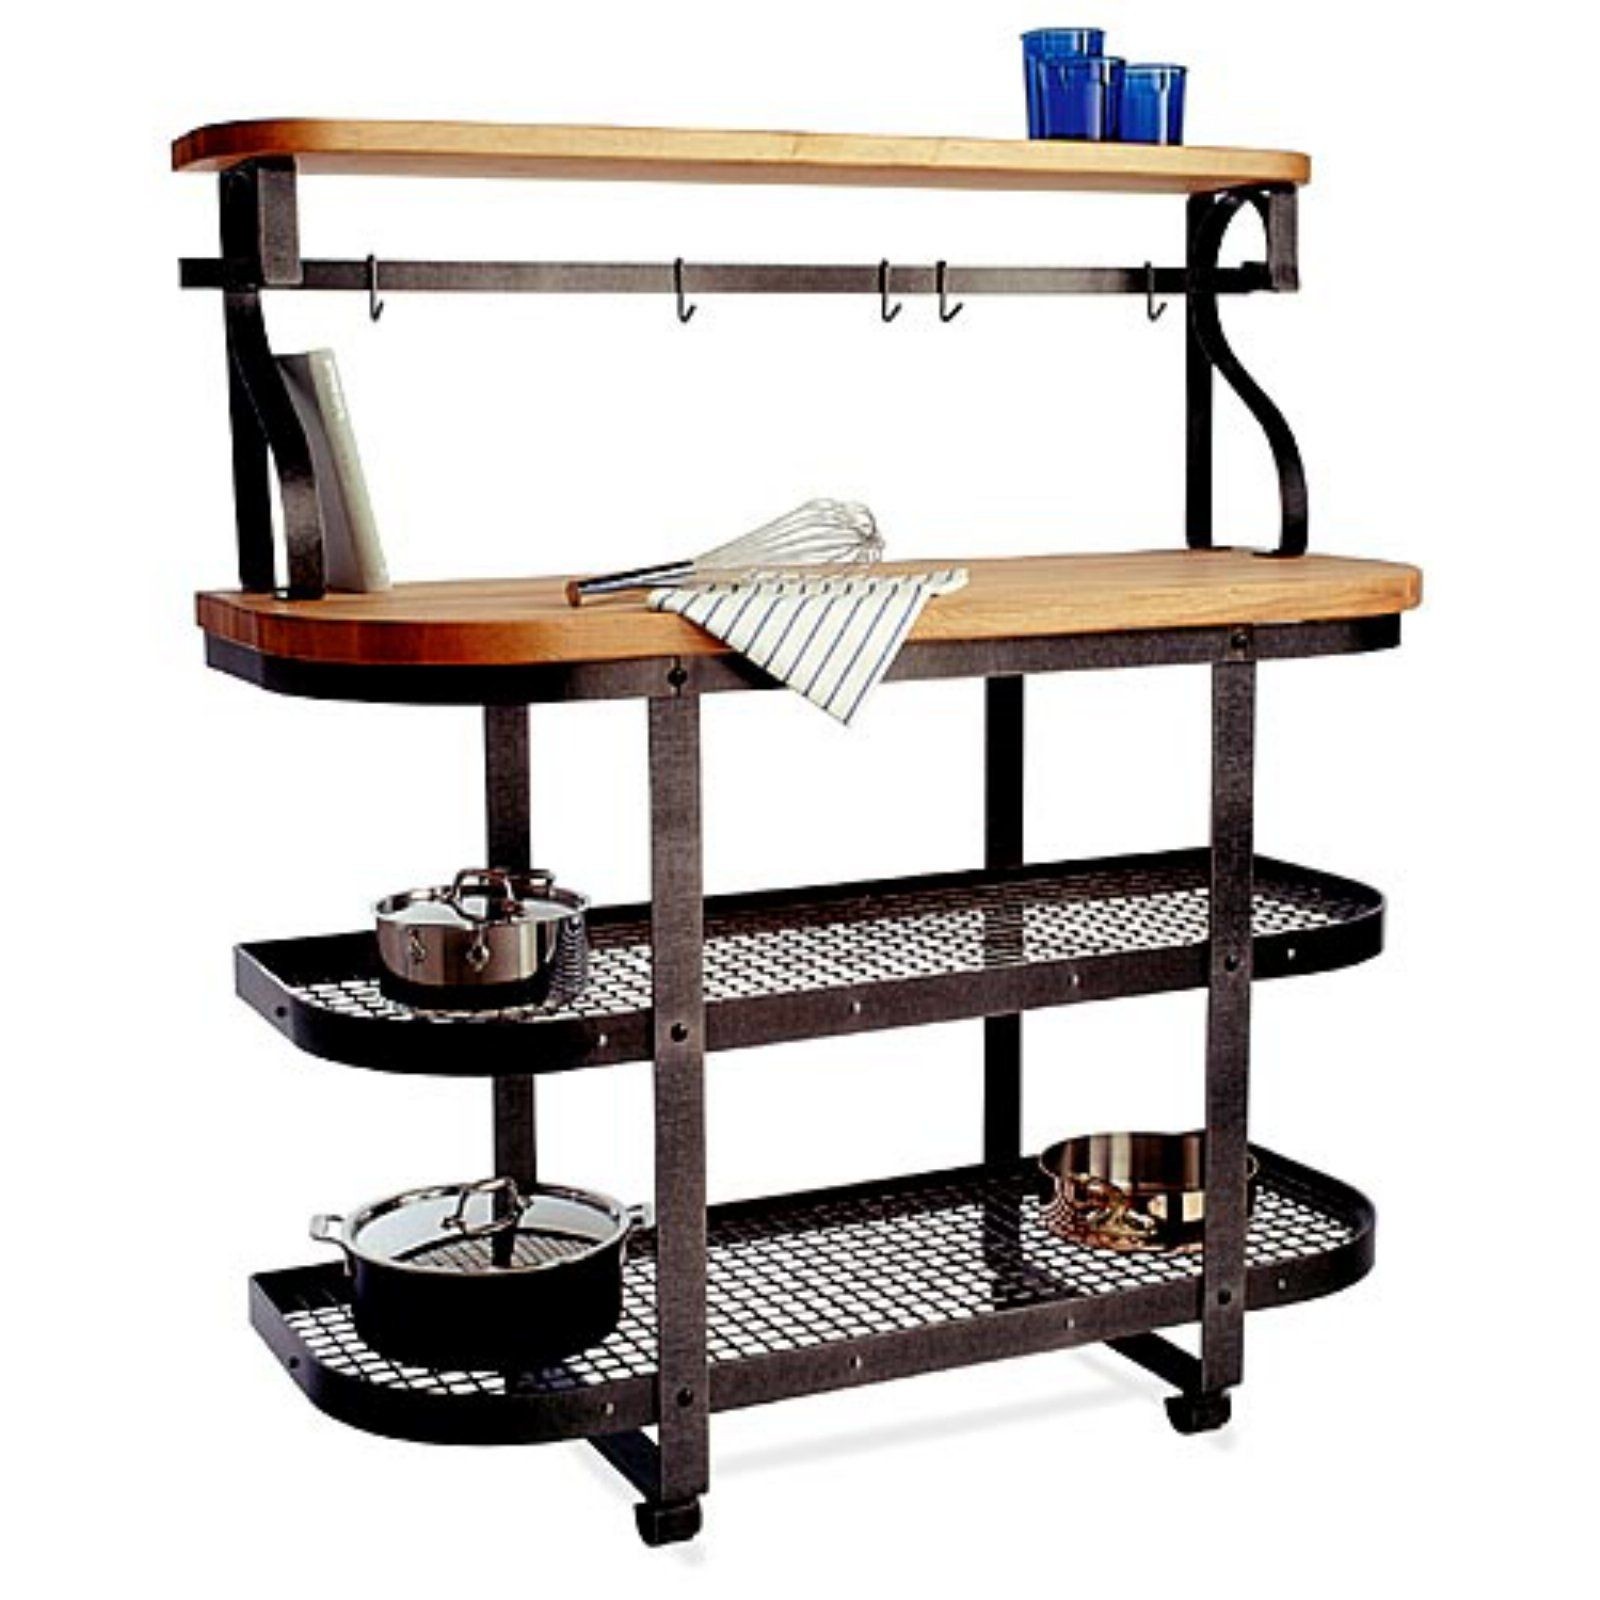 Enclume Enclume Chefs Gourmet Bakers Rack Island with Hutch